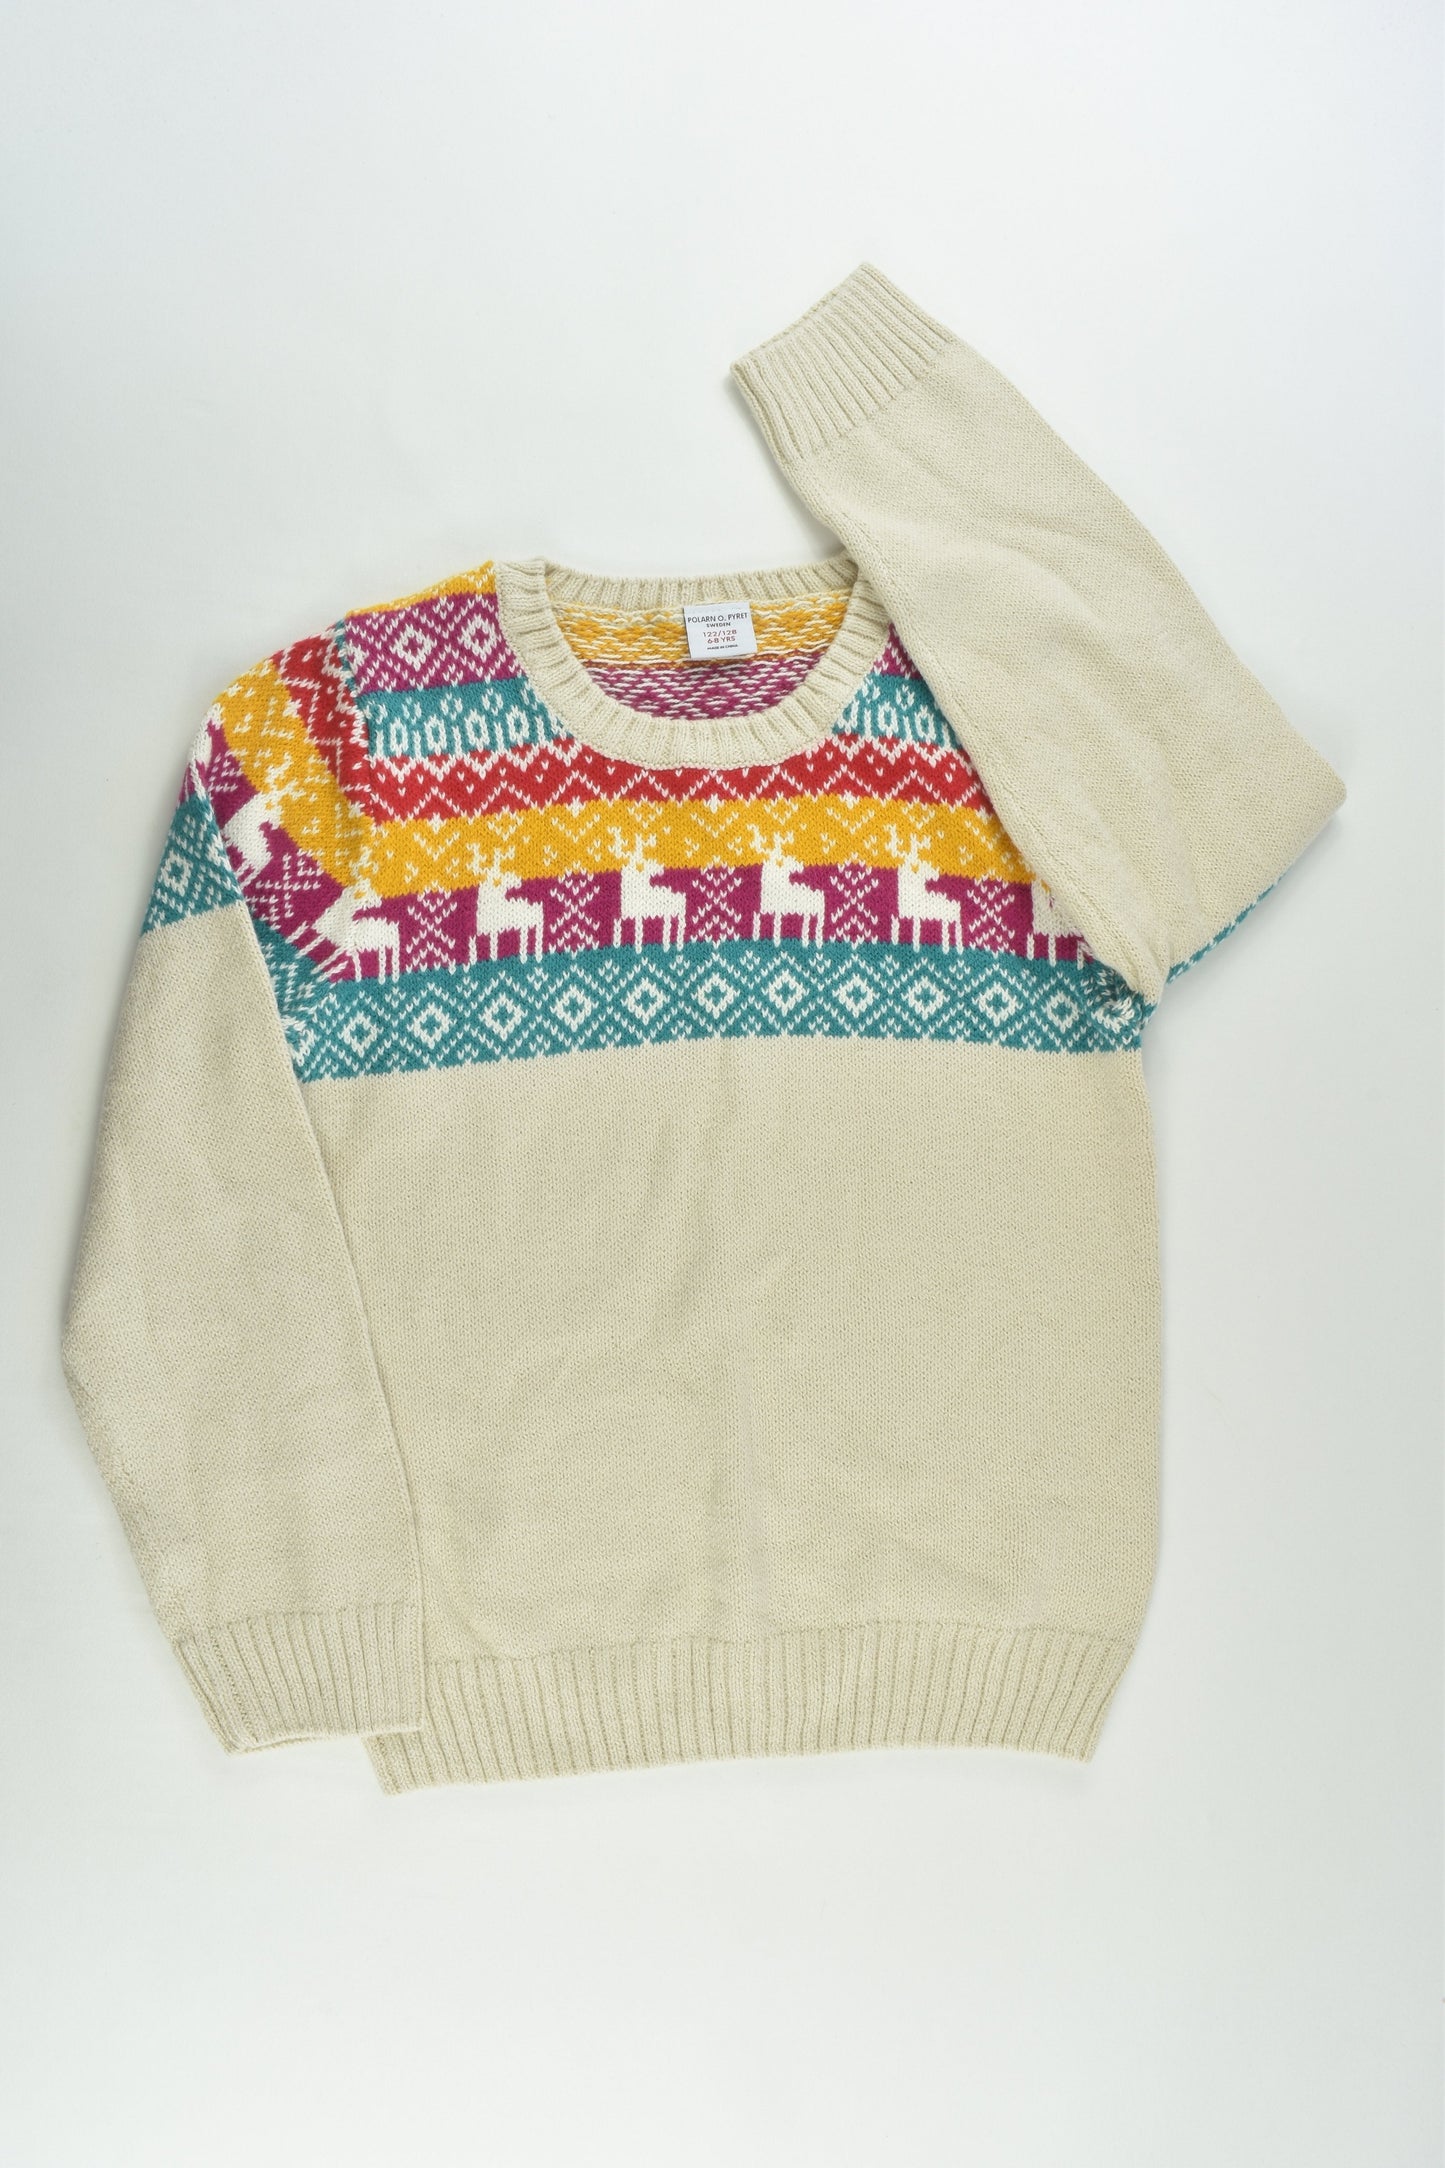 Polarn O. Pyret Size 6-8 (122/128 cm) Nordic Knitted Jumper